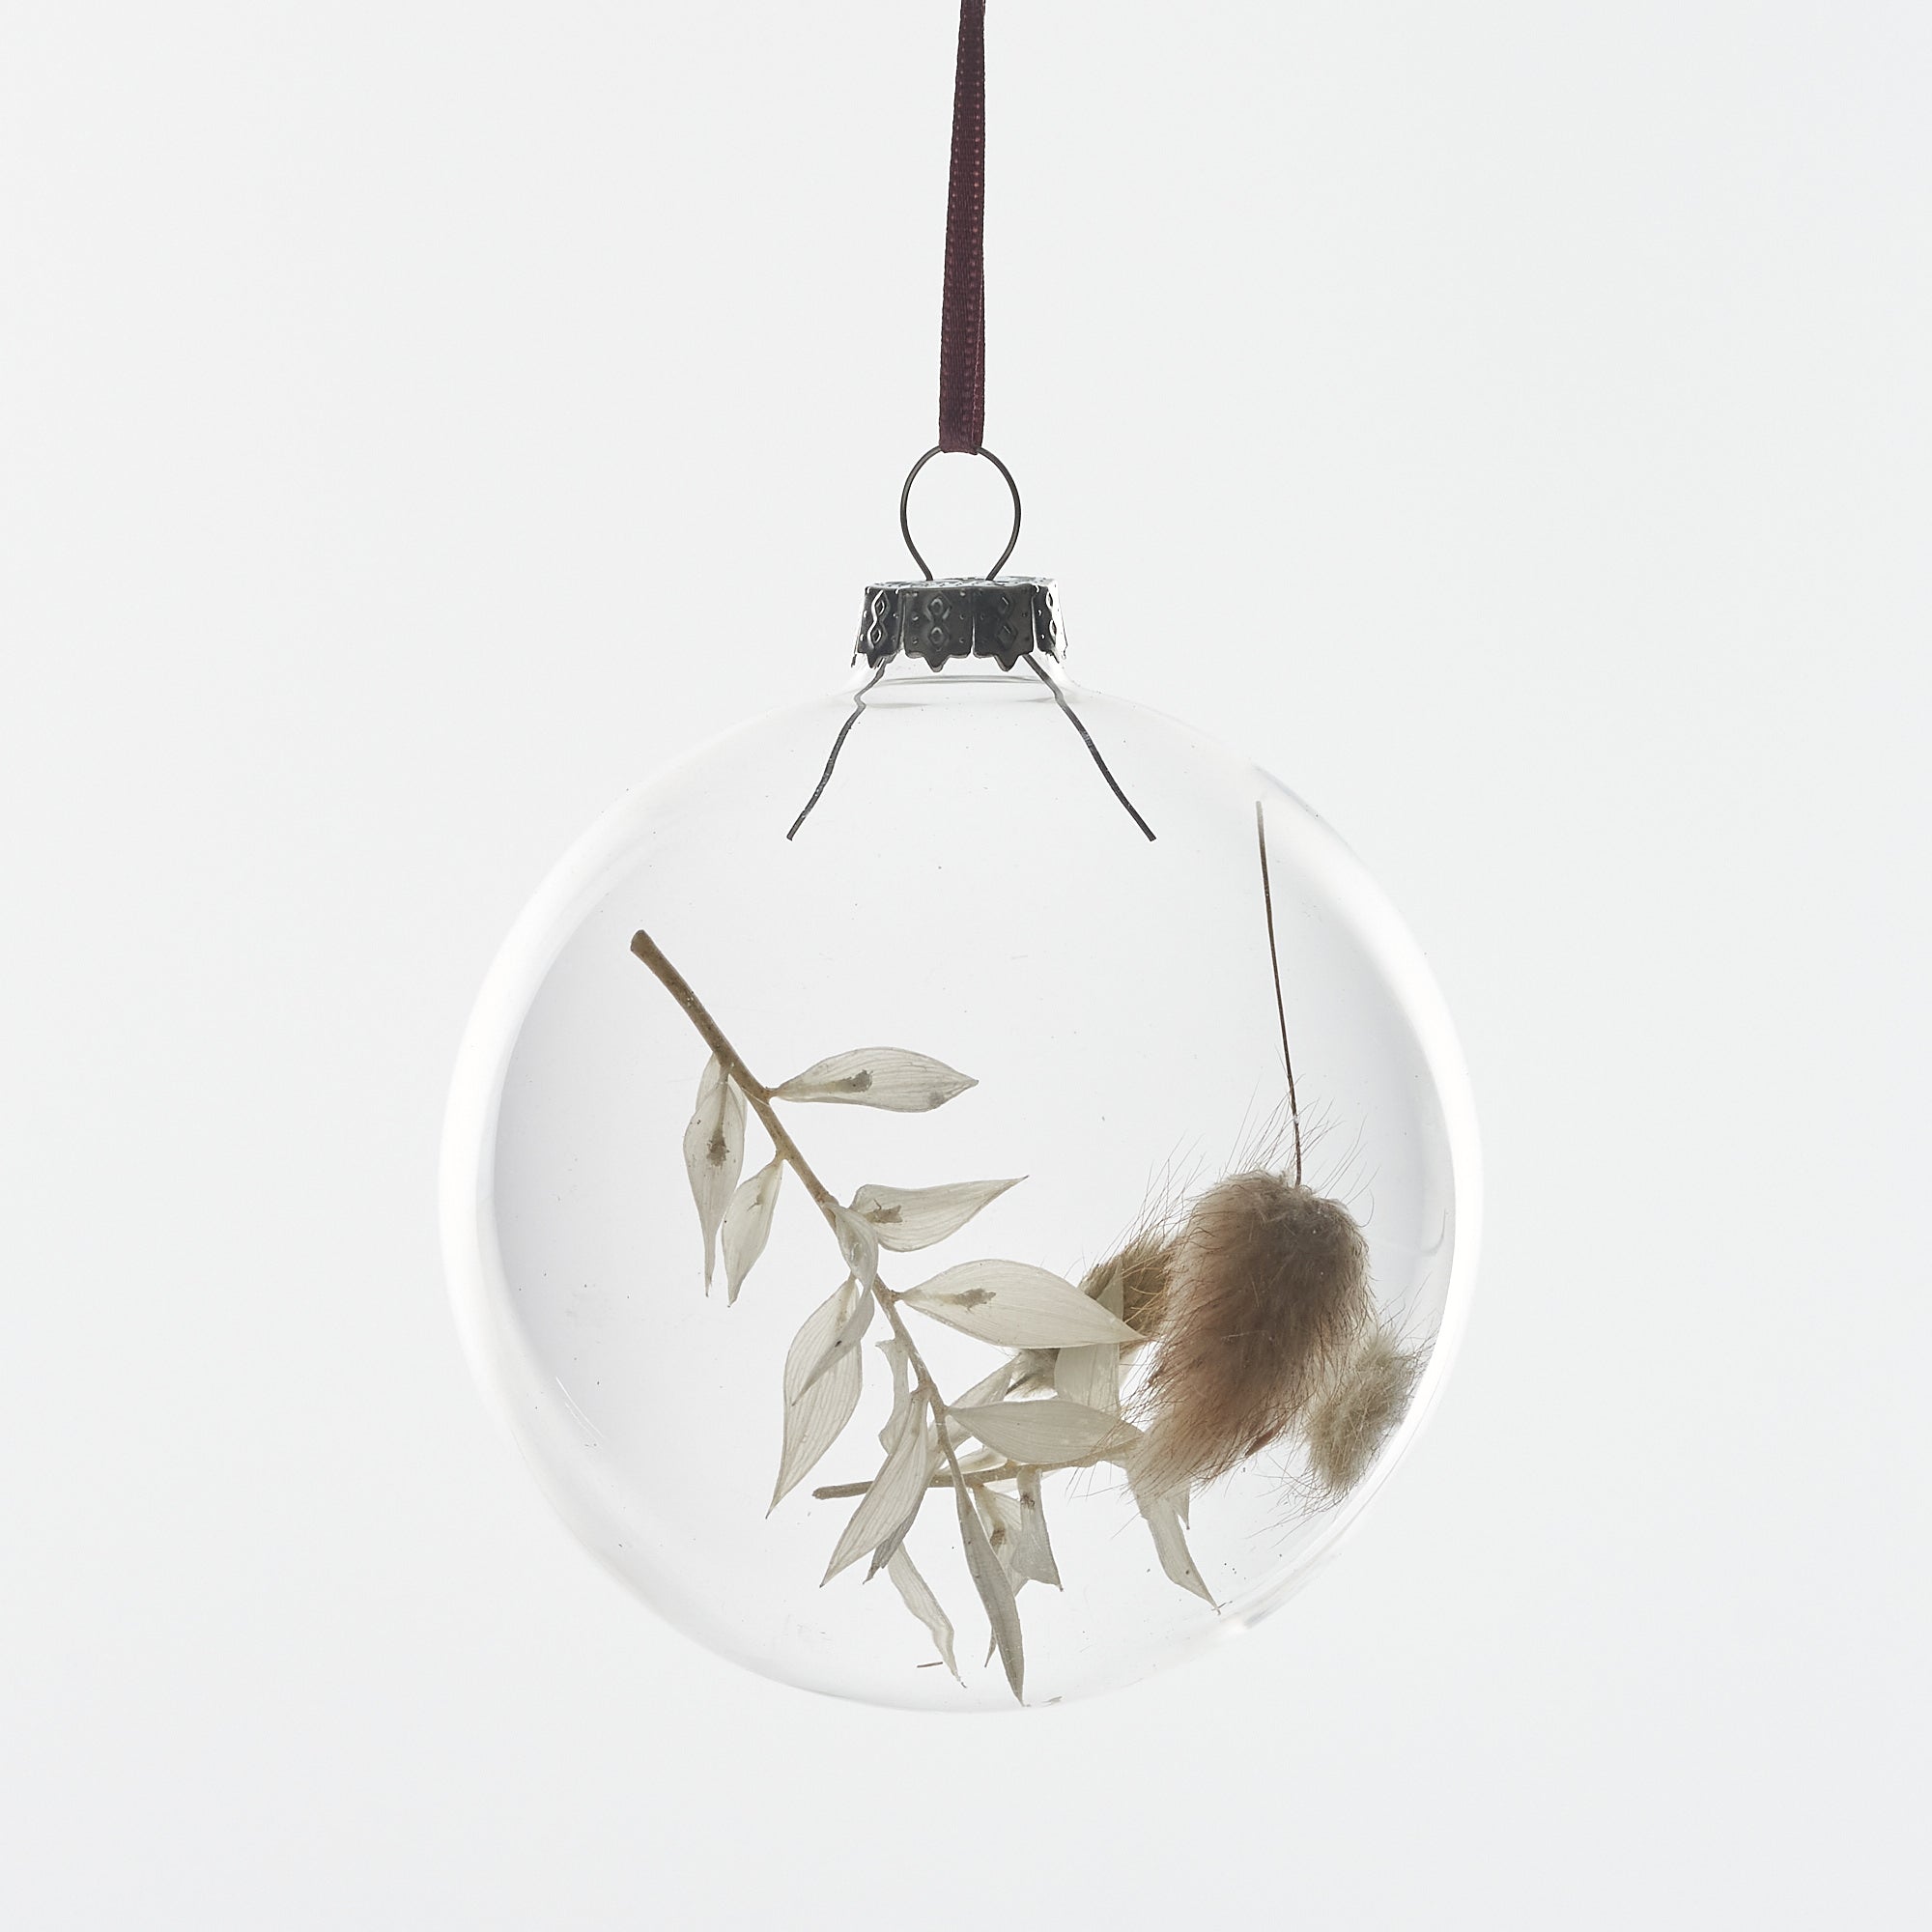 Single Dried flower Baubles: White